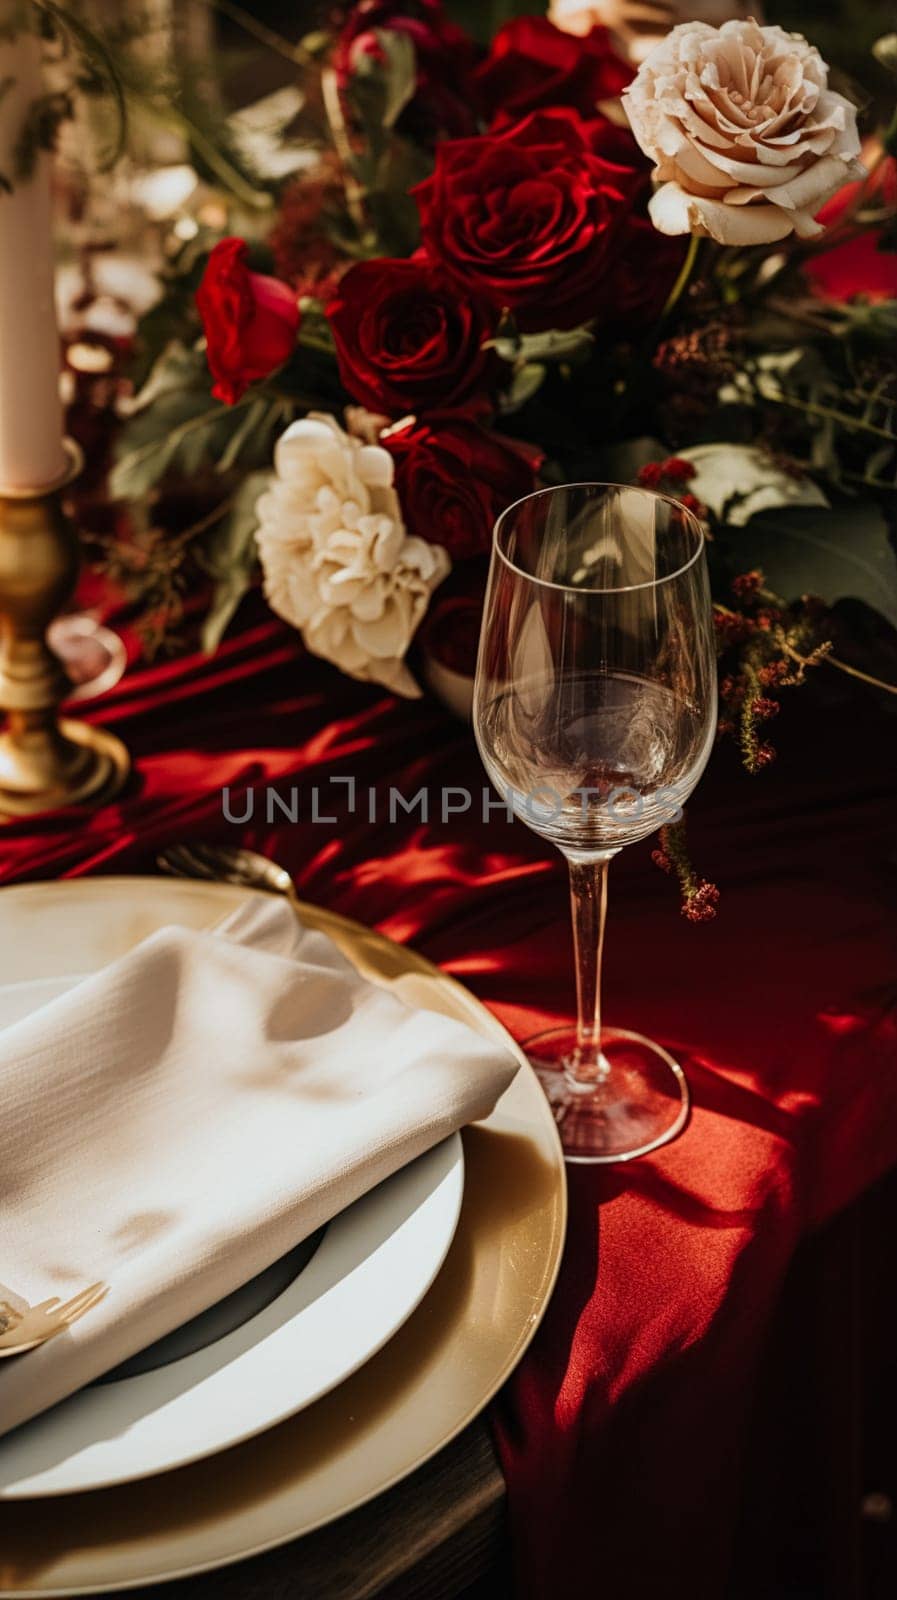 Elegant tablescape, formal dinner table setting with red roses and wine, elegant table decor for wedding, dinner party and holiday event decoration, home styling by Anneleven